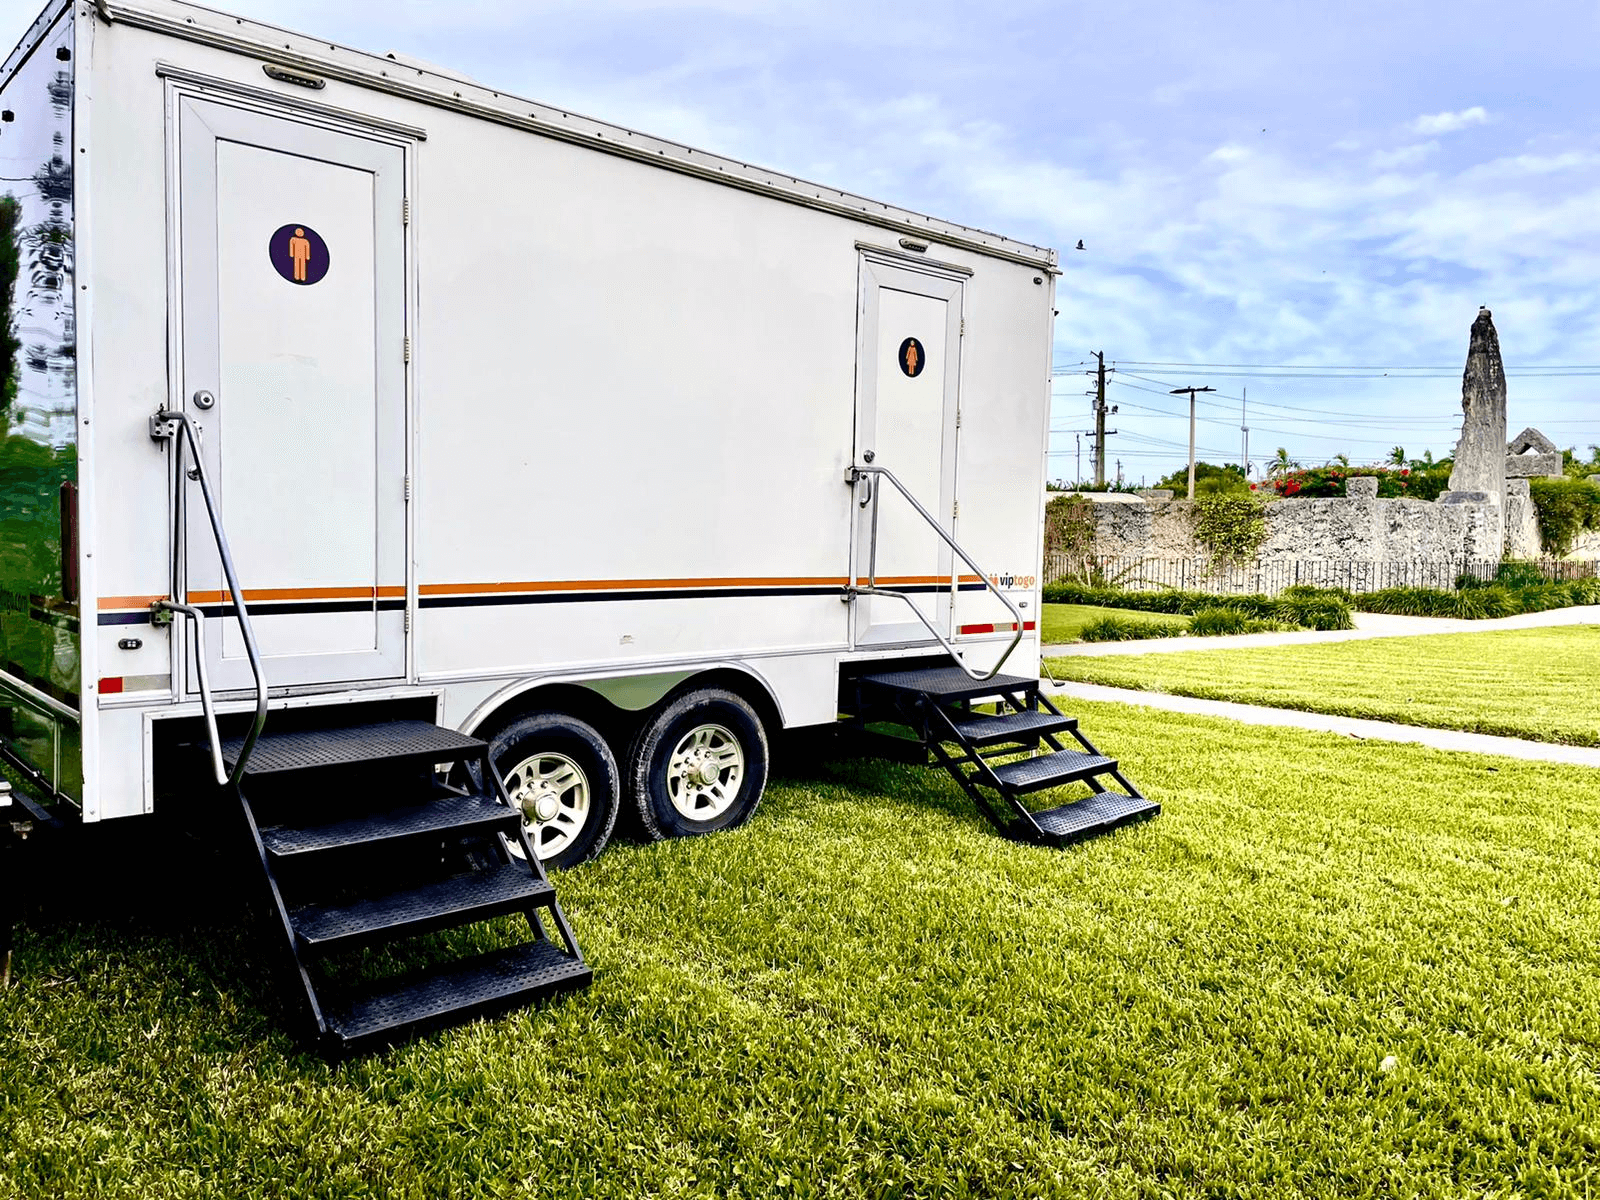 mobile restroom trailer at an outdoor public event